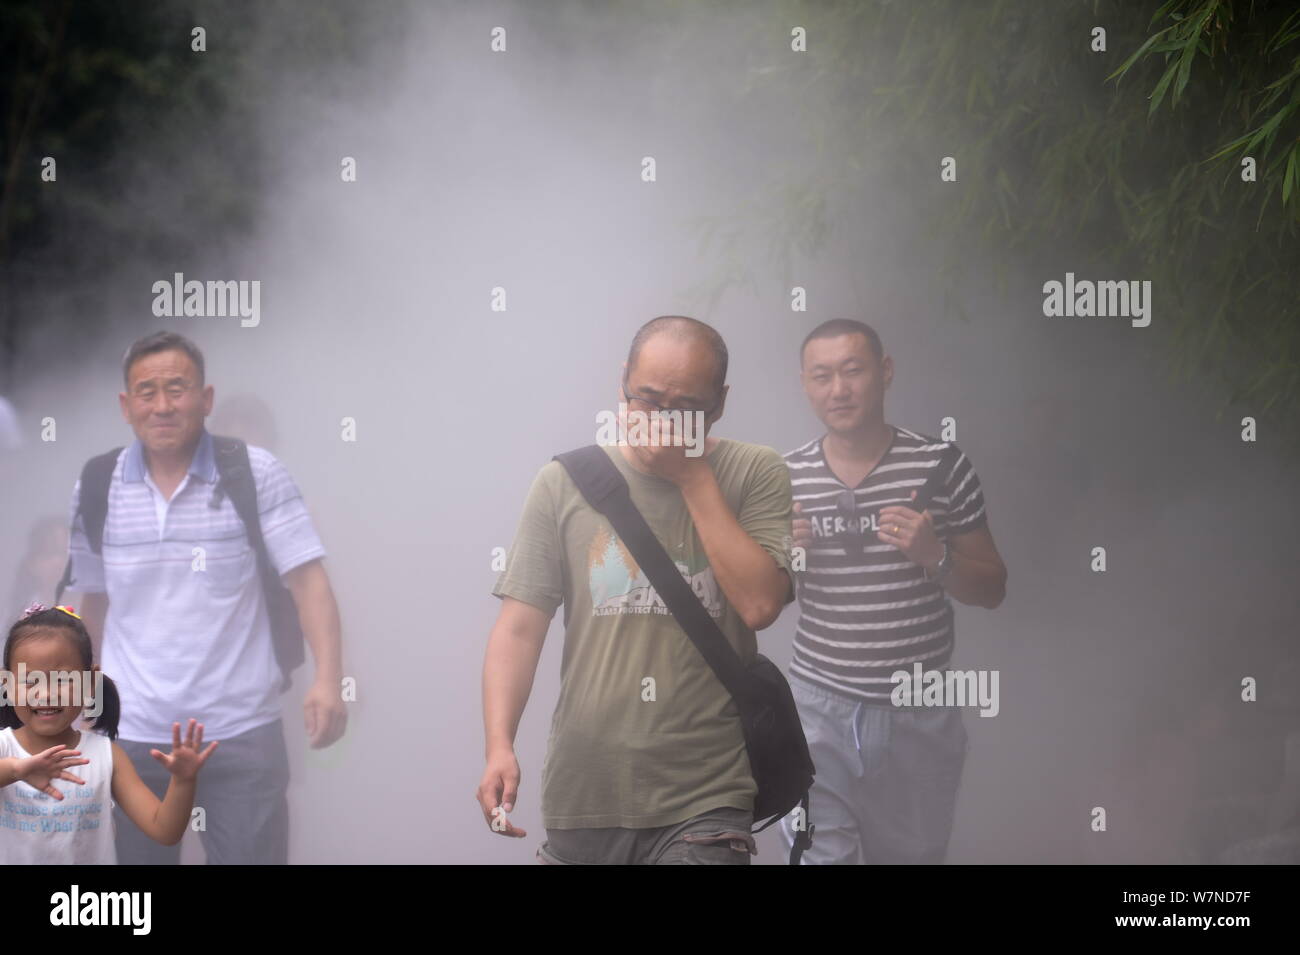 A tourist covers his mouth and nose with his hands as he mistakes the water vapor for dense smoke of a fire at the Beijing Zoo in Beijing, China, 25 J Stock Photo